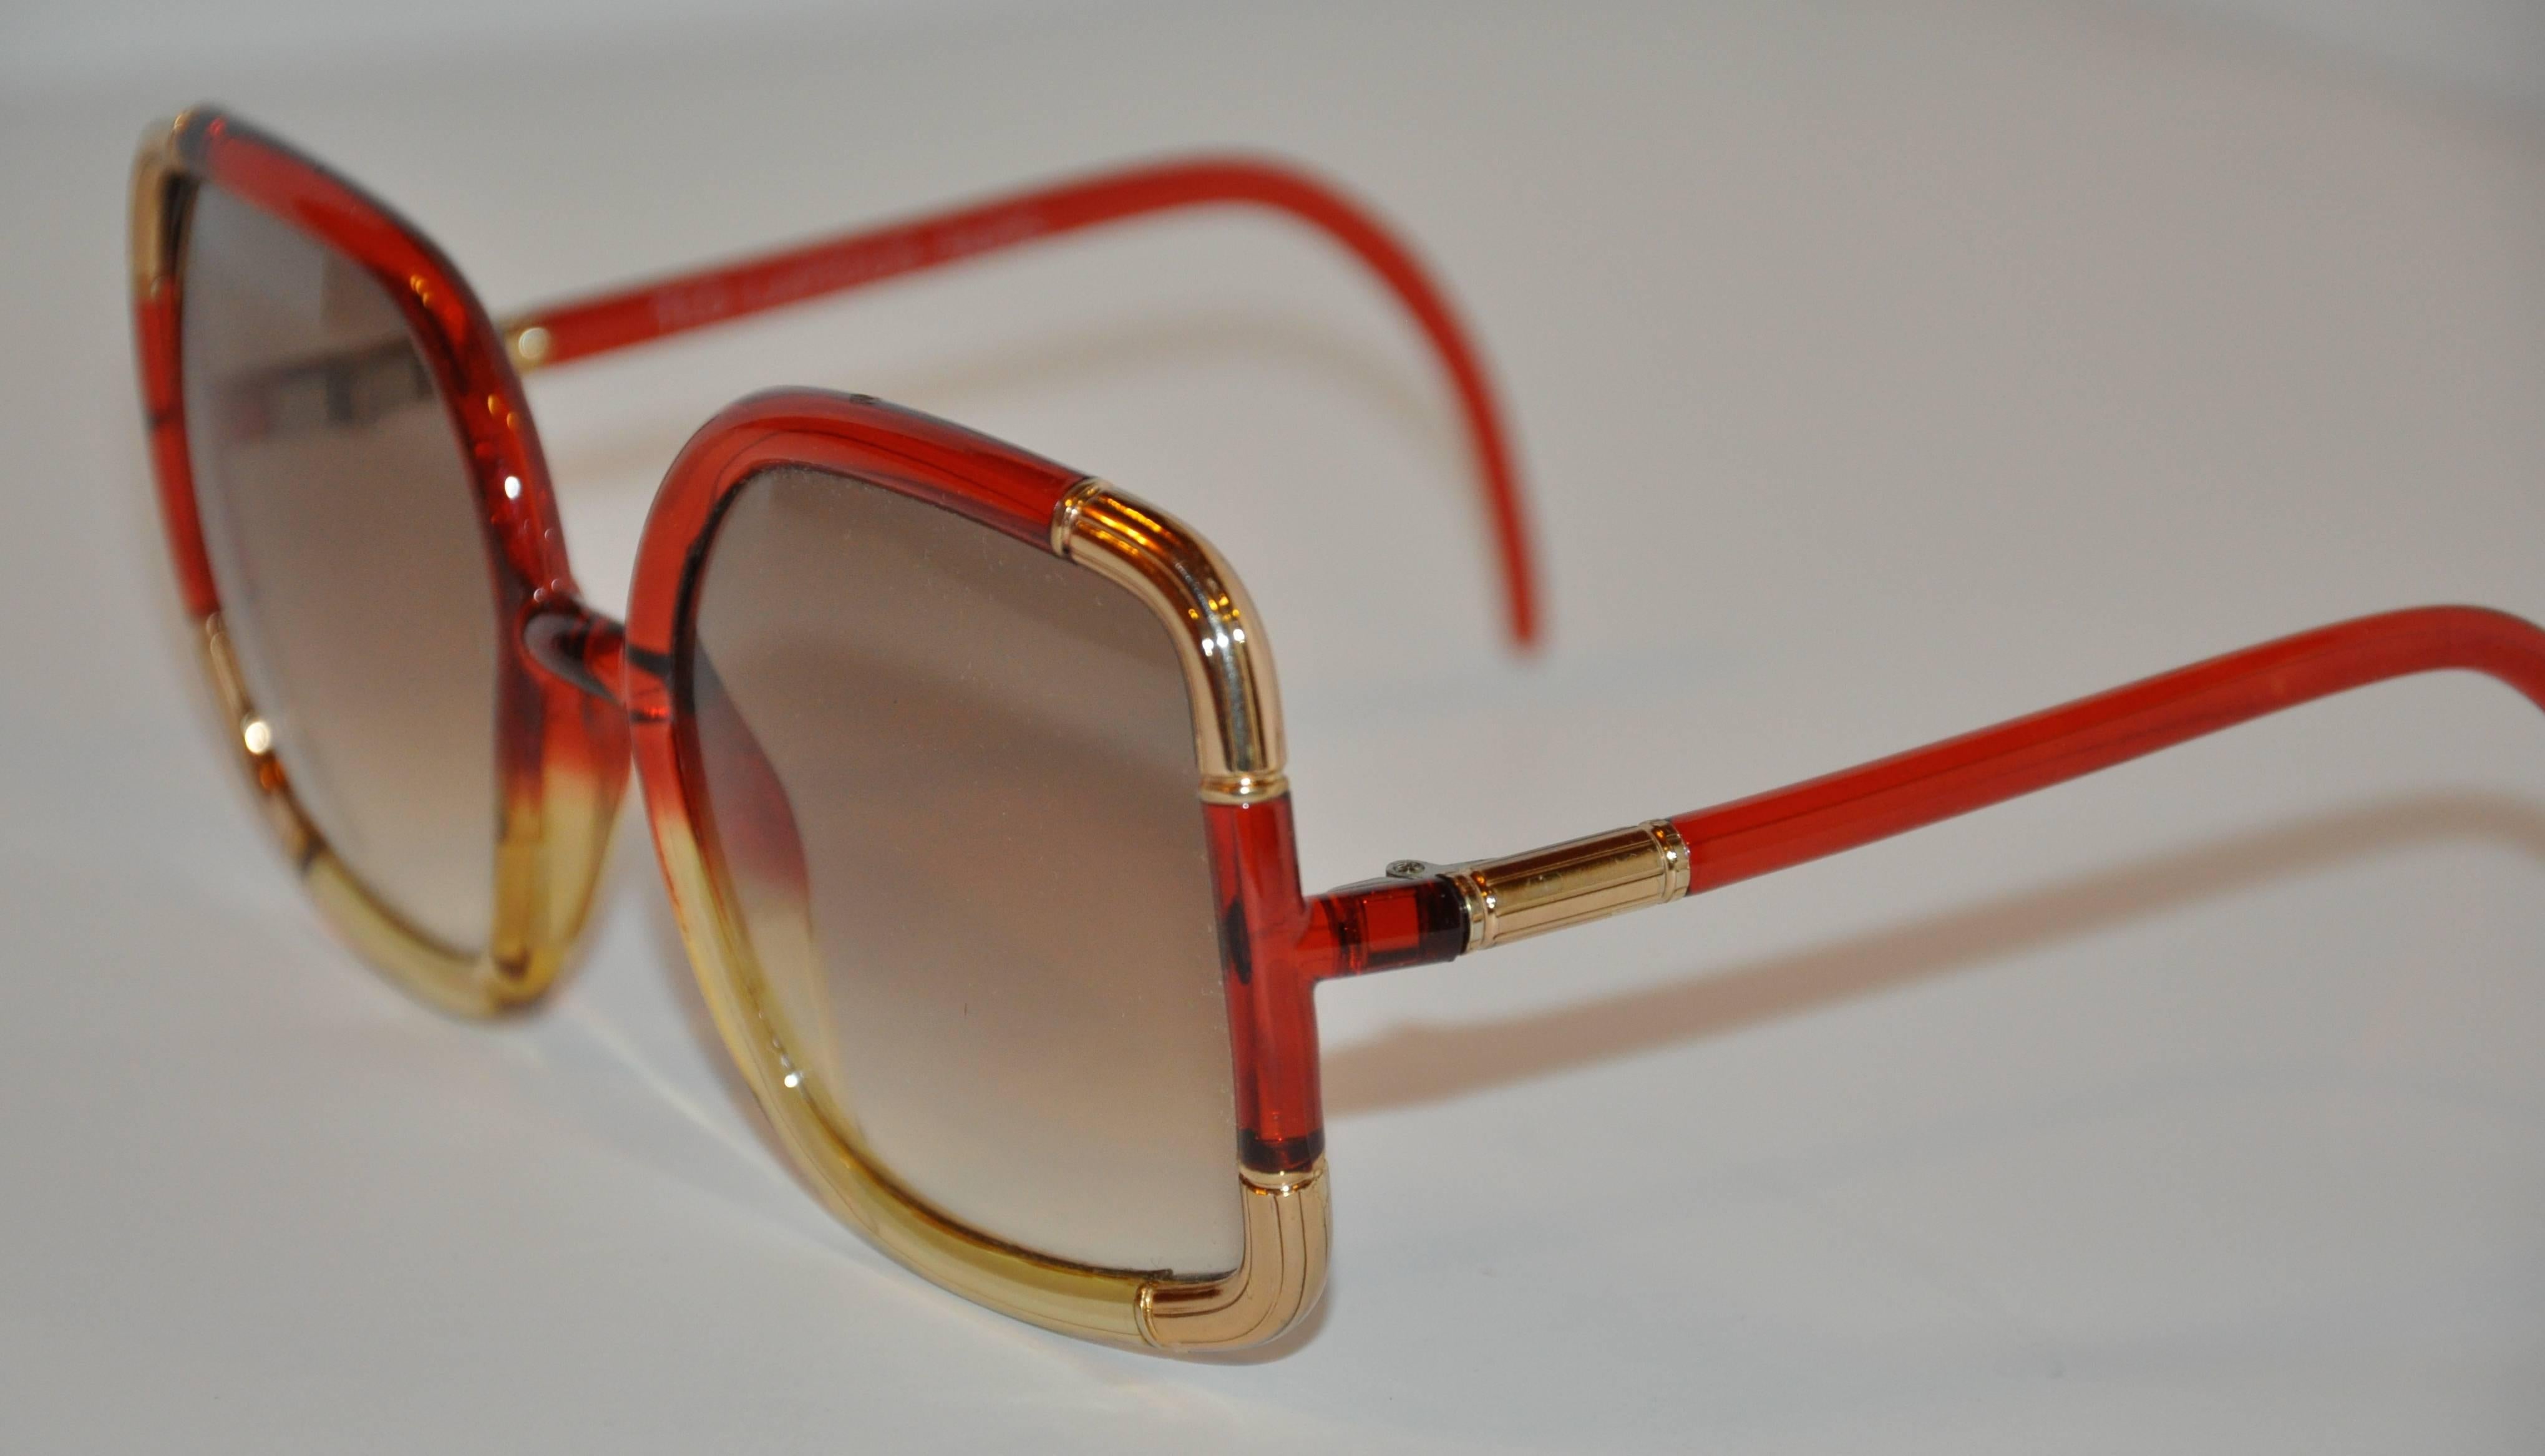 Ted Lapidus wonderful combination of red and gold lucid is accented with detailed engraved gold-tone 